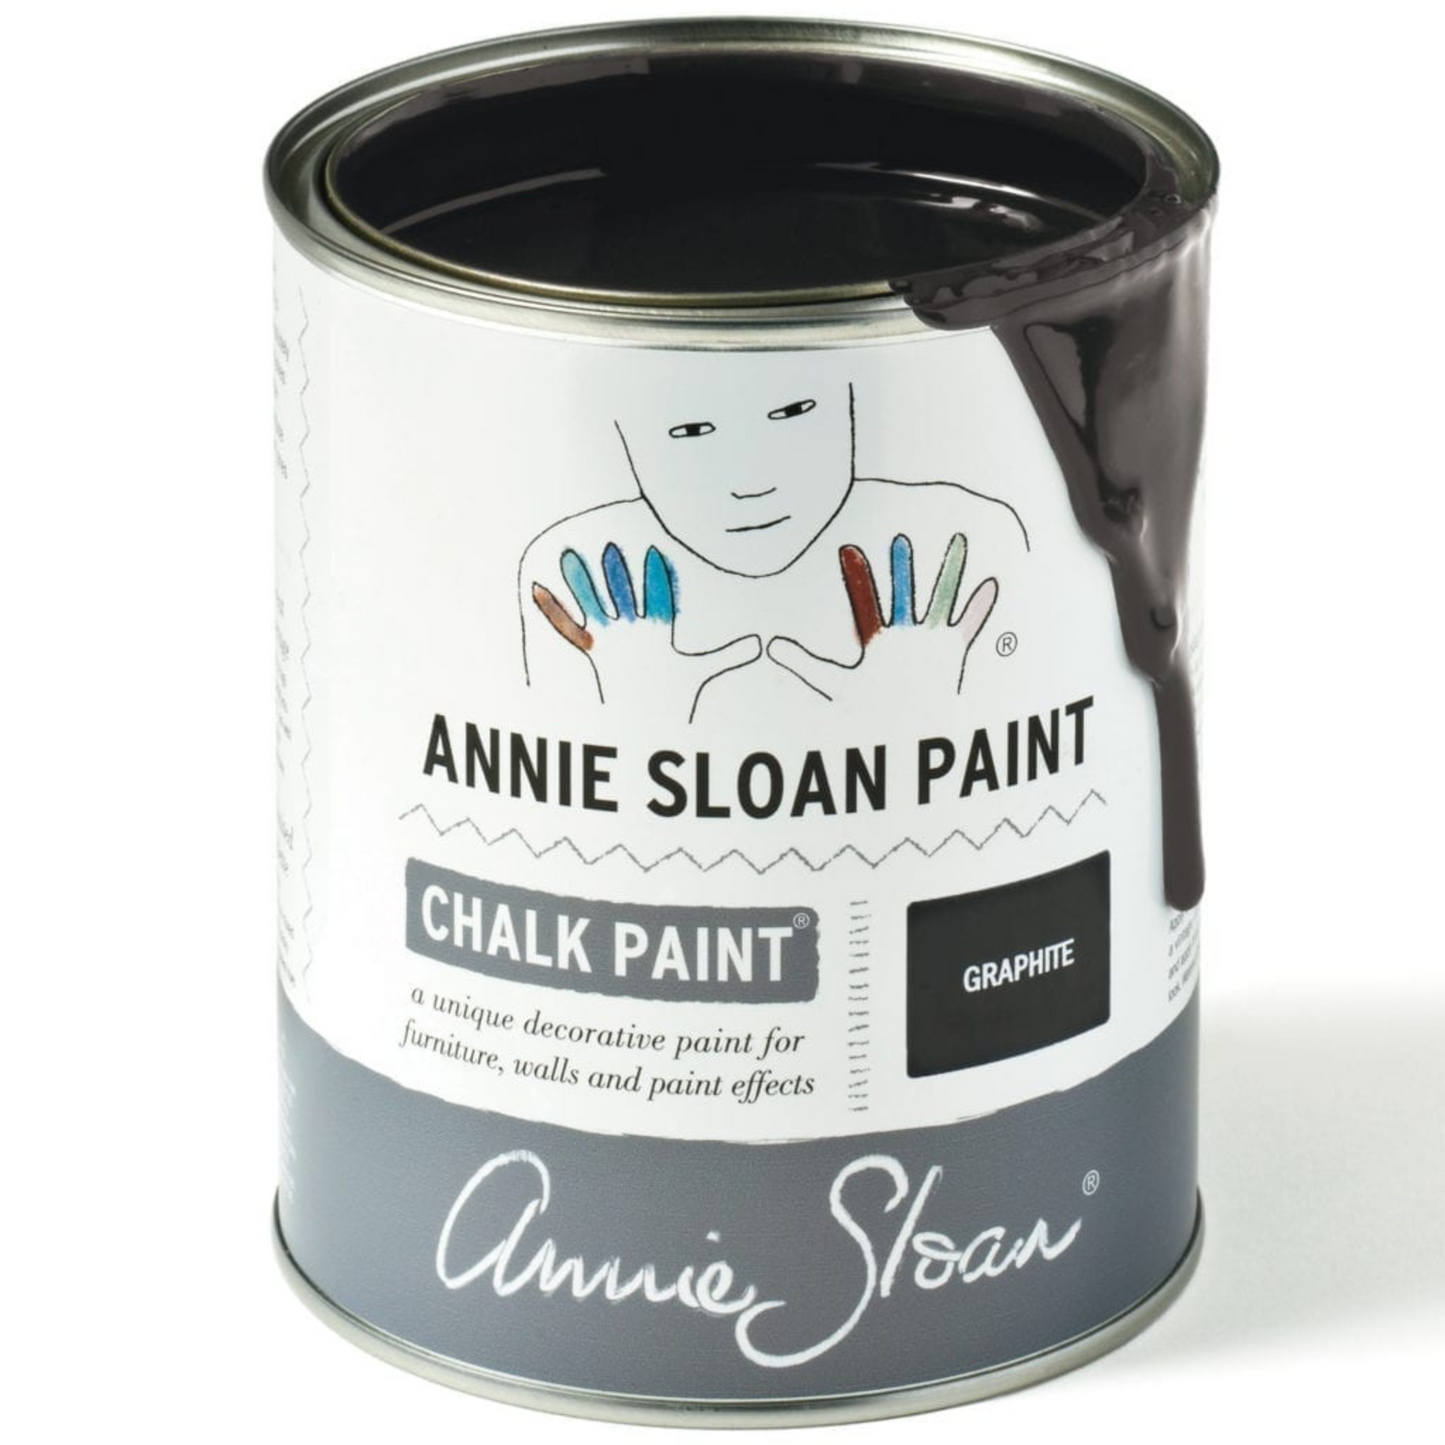 Can of Graphite Annie Sloan Chalk paint.